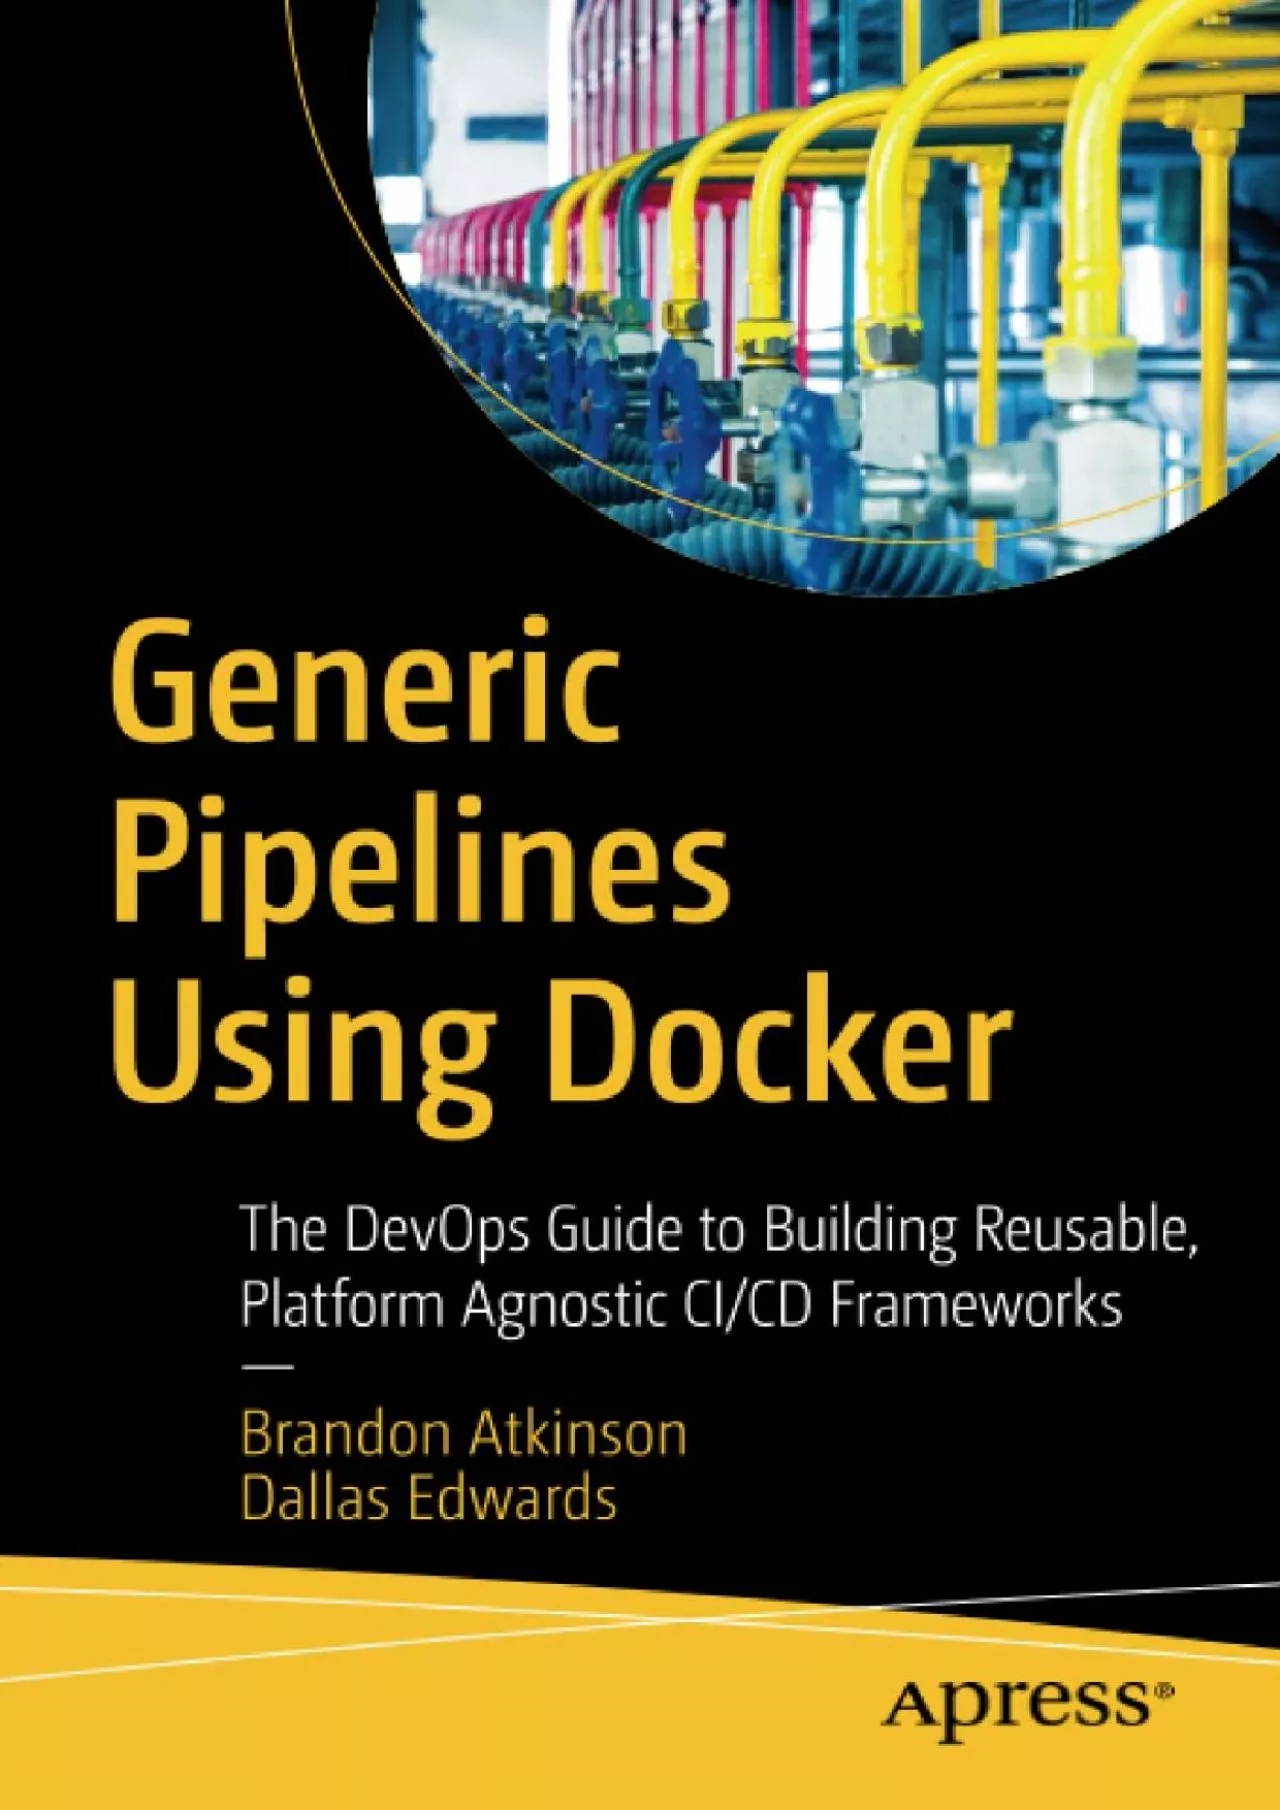 [READING BOOK]-Generic Pipelines Using Docker: The DevOps Guide to Building Reusable,